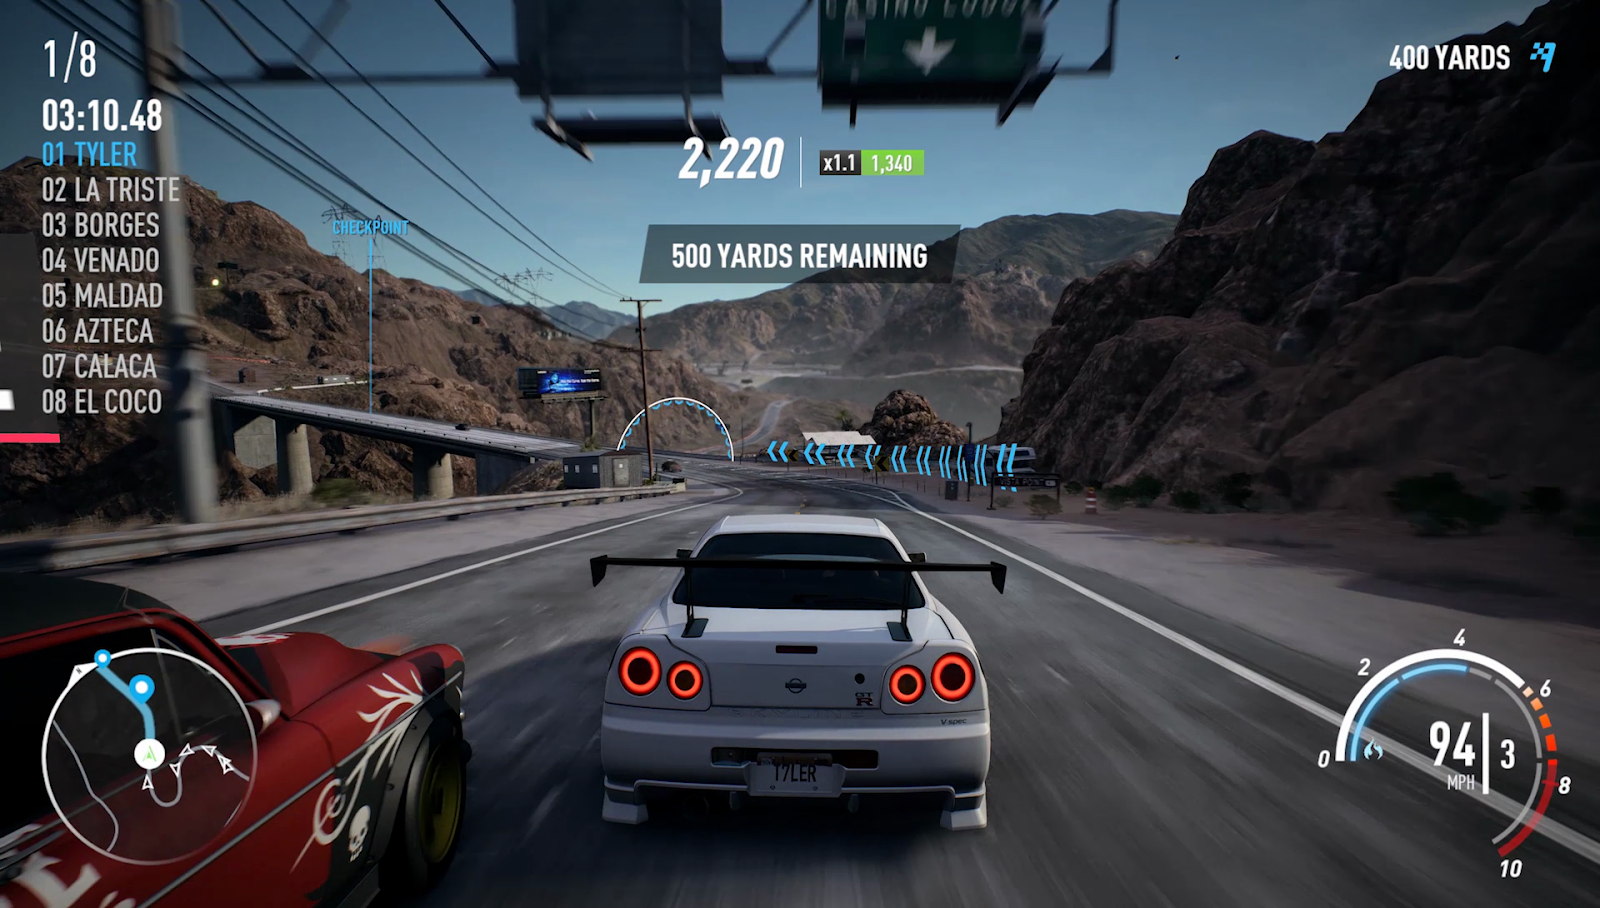 Need For Speed Payback Download For Mac